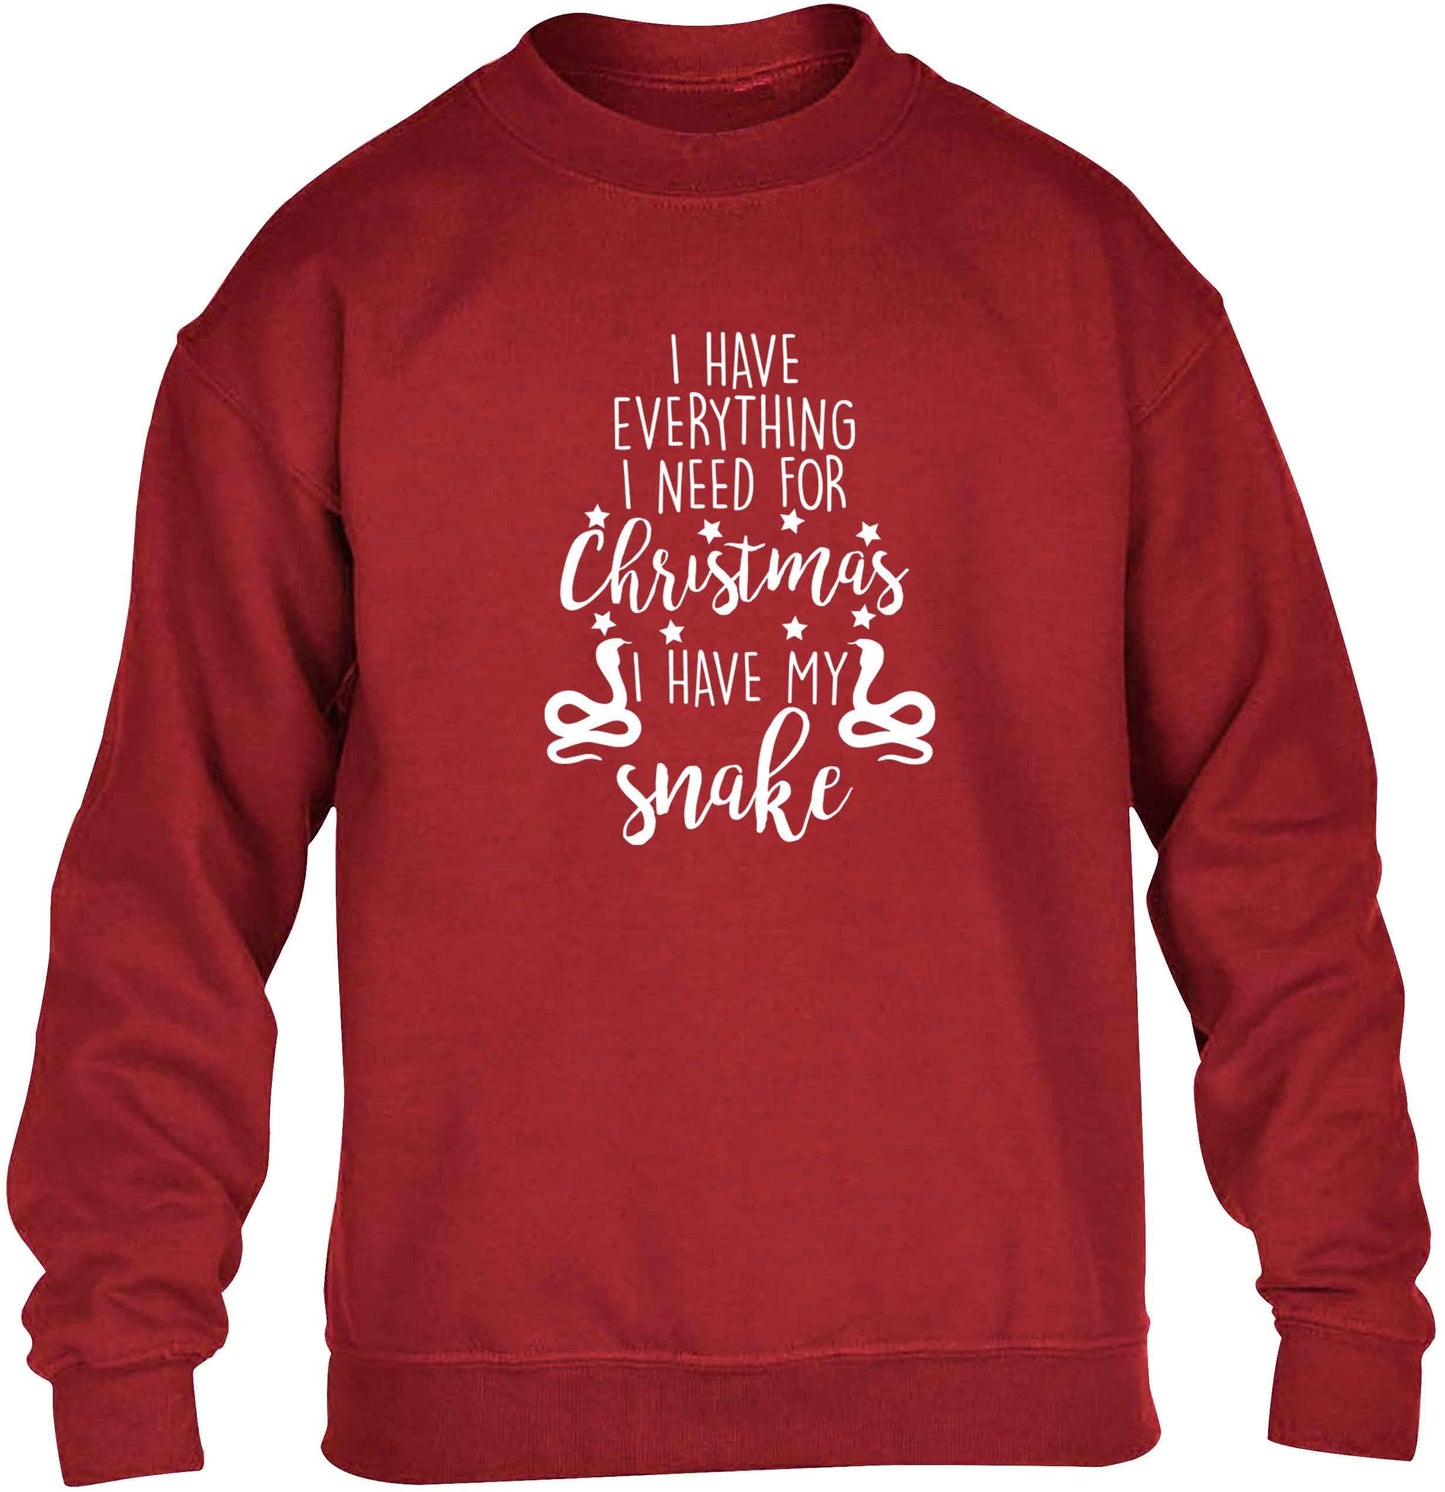 I have everything I need for Christmas I have my snake children's grey sweater 12-13 Years